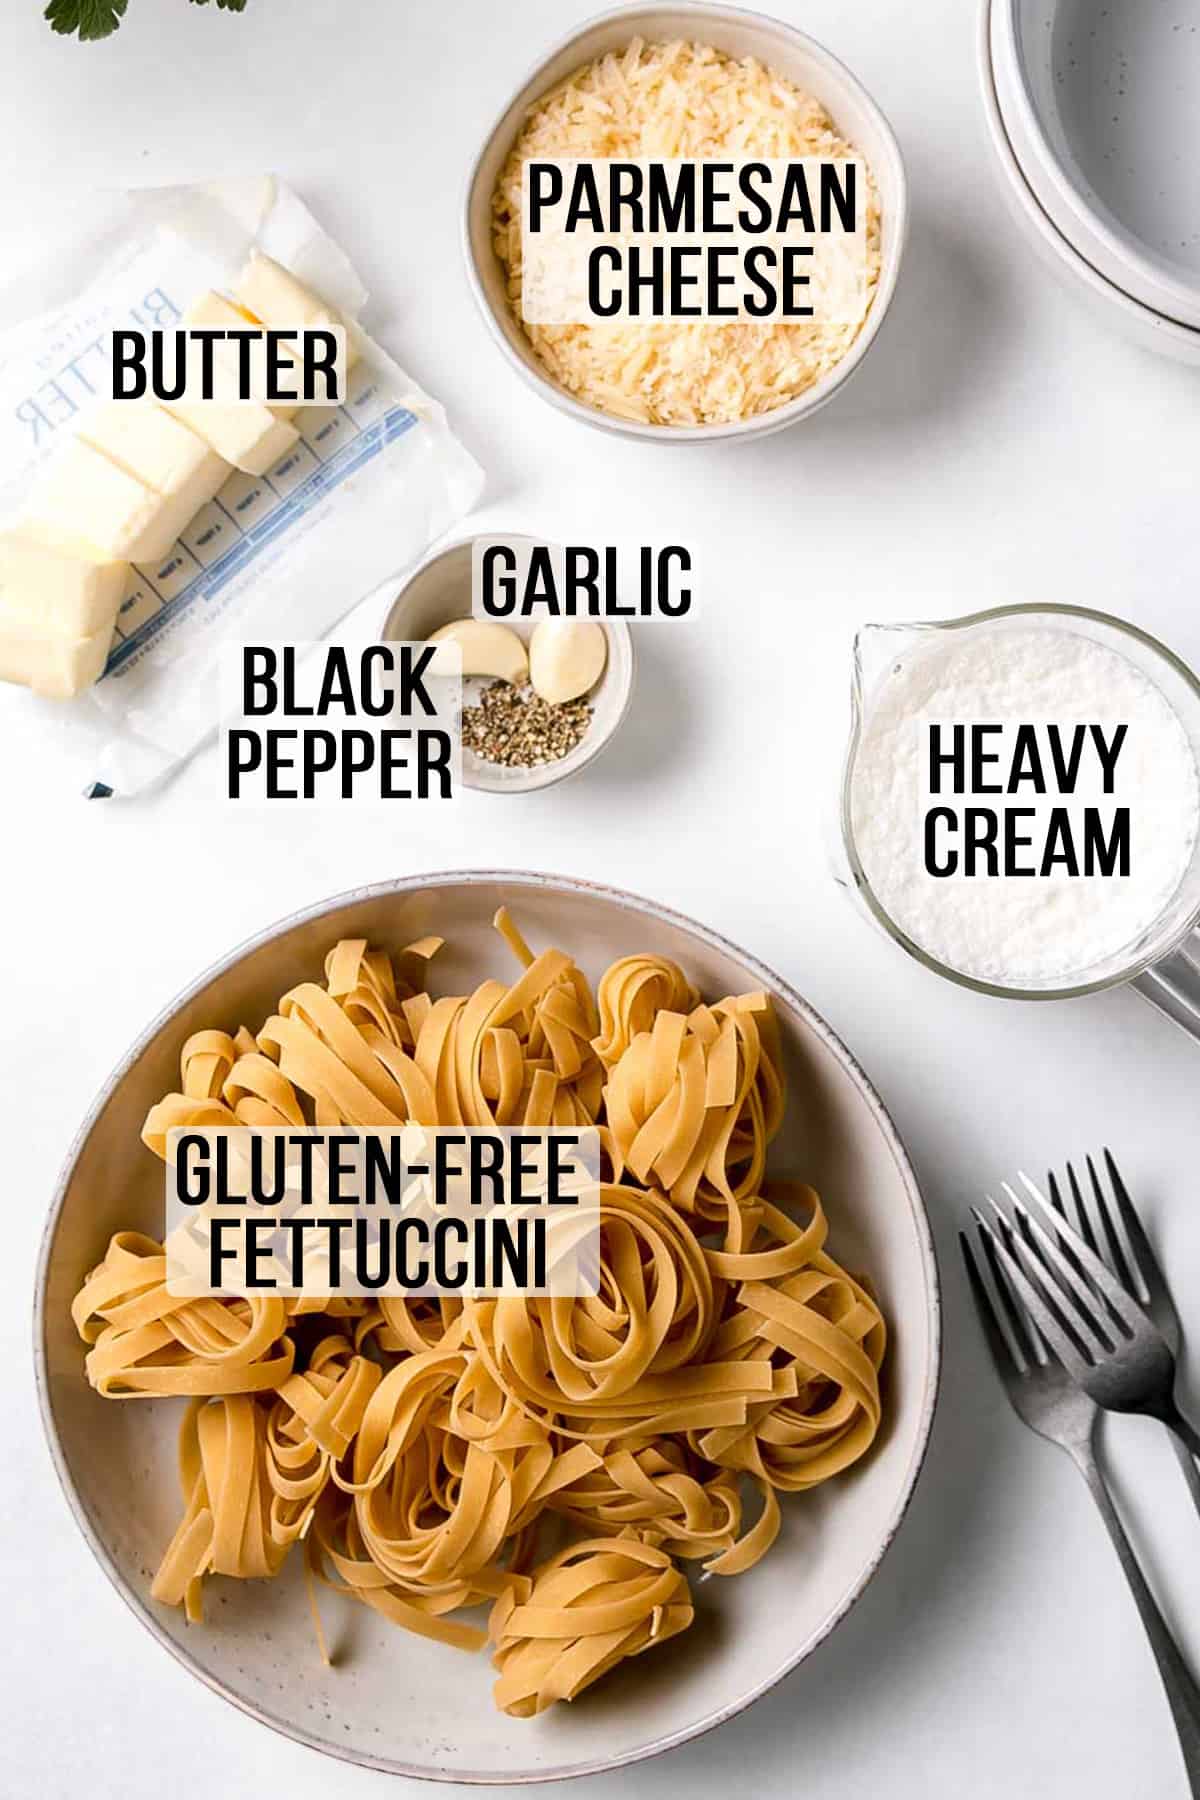 Ingredients for gluten free fettuccini Alfredo measured out in bowls.